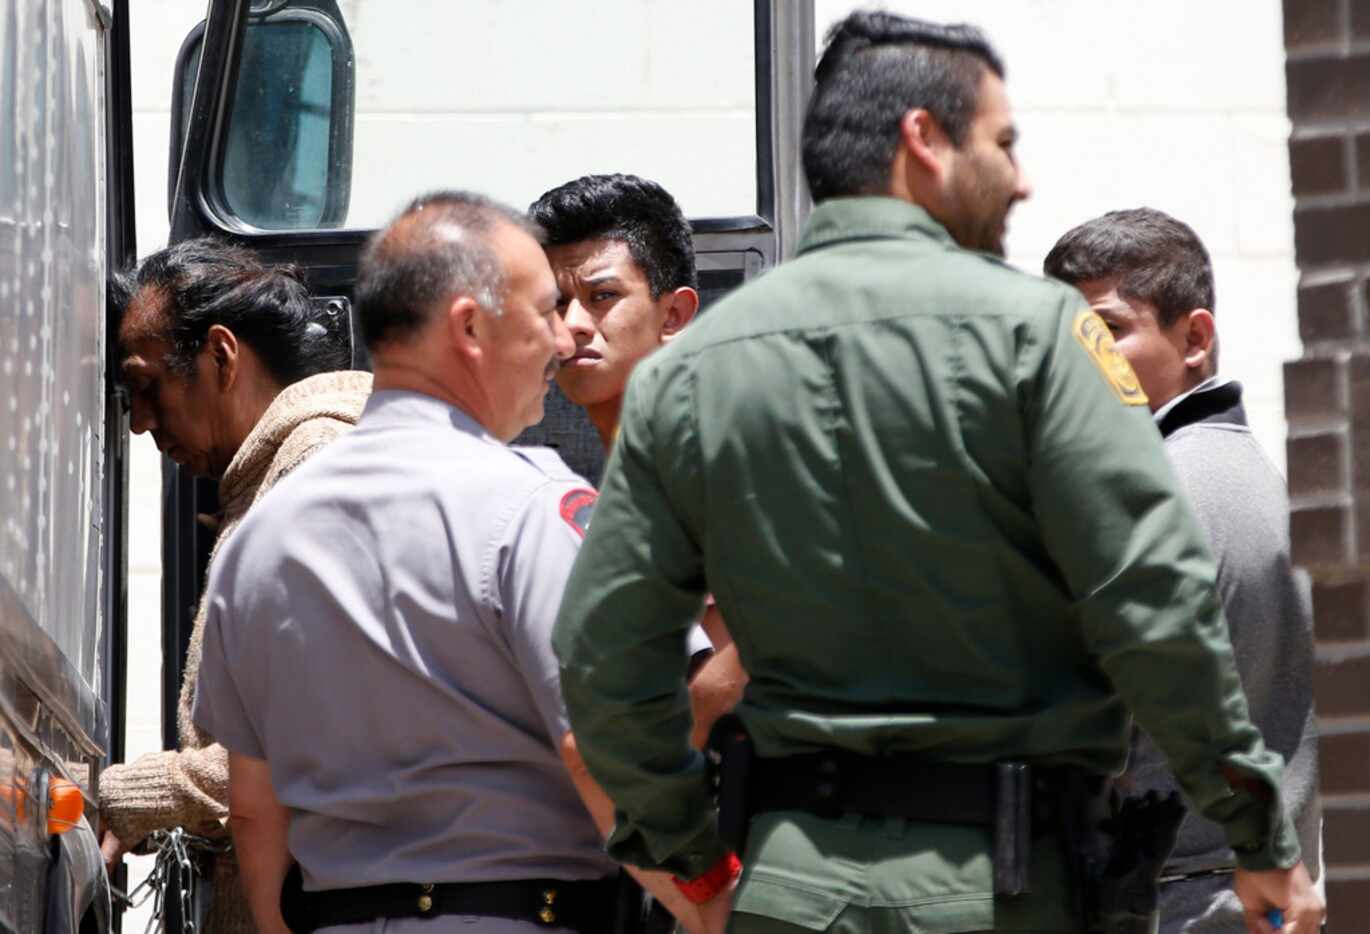 Detained immigrants load into buses at the federal courthouse in McAllen, Texas, on June 11,...